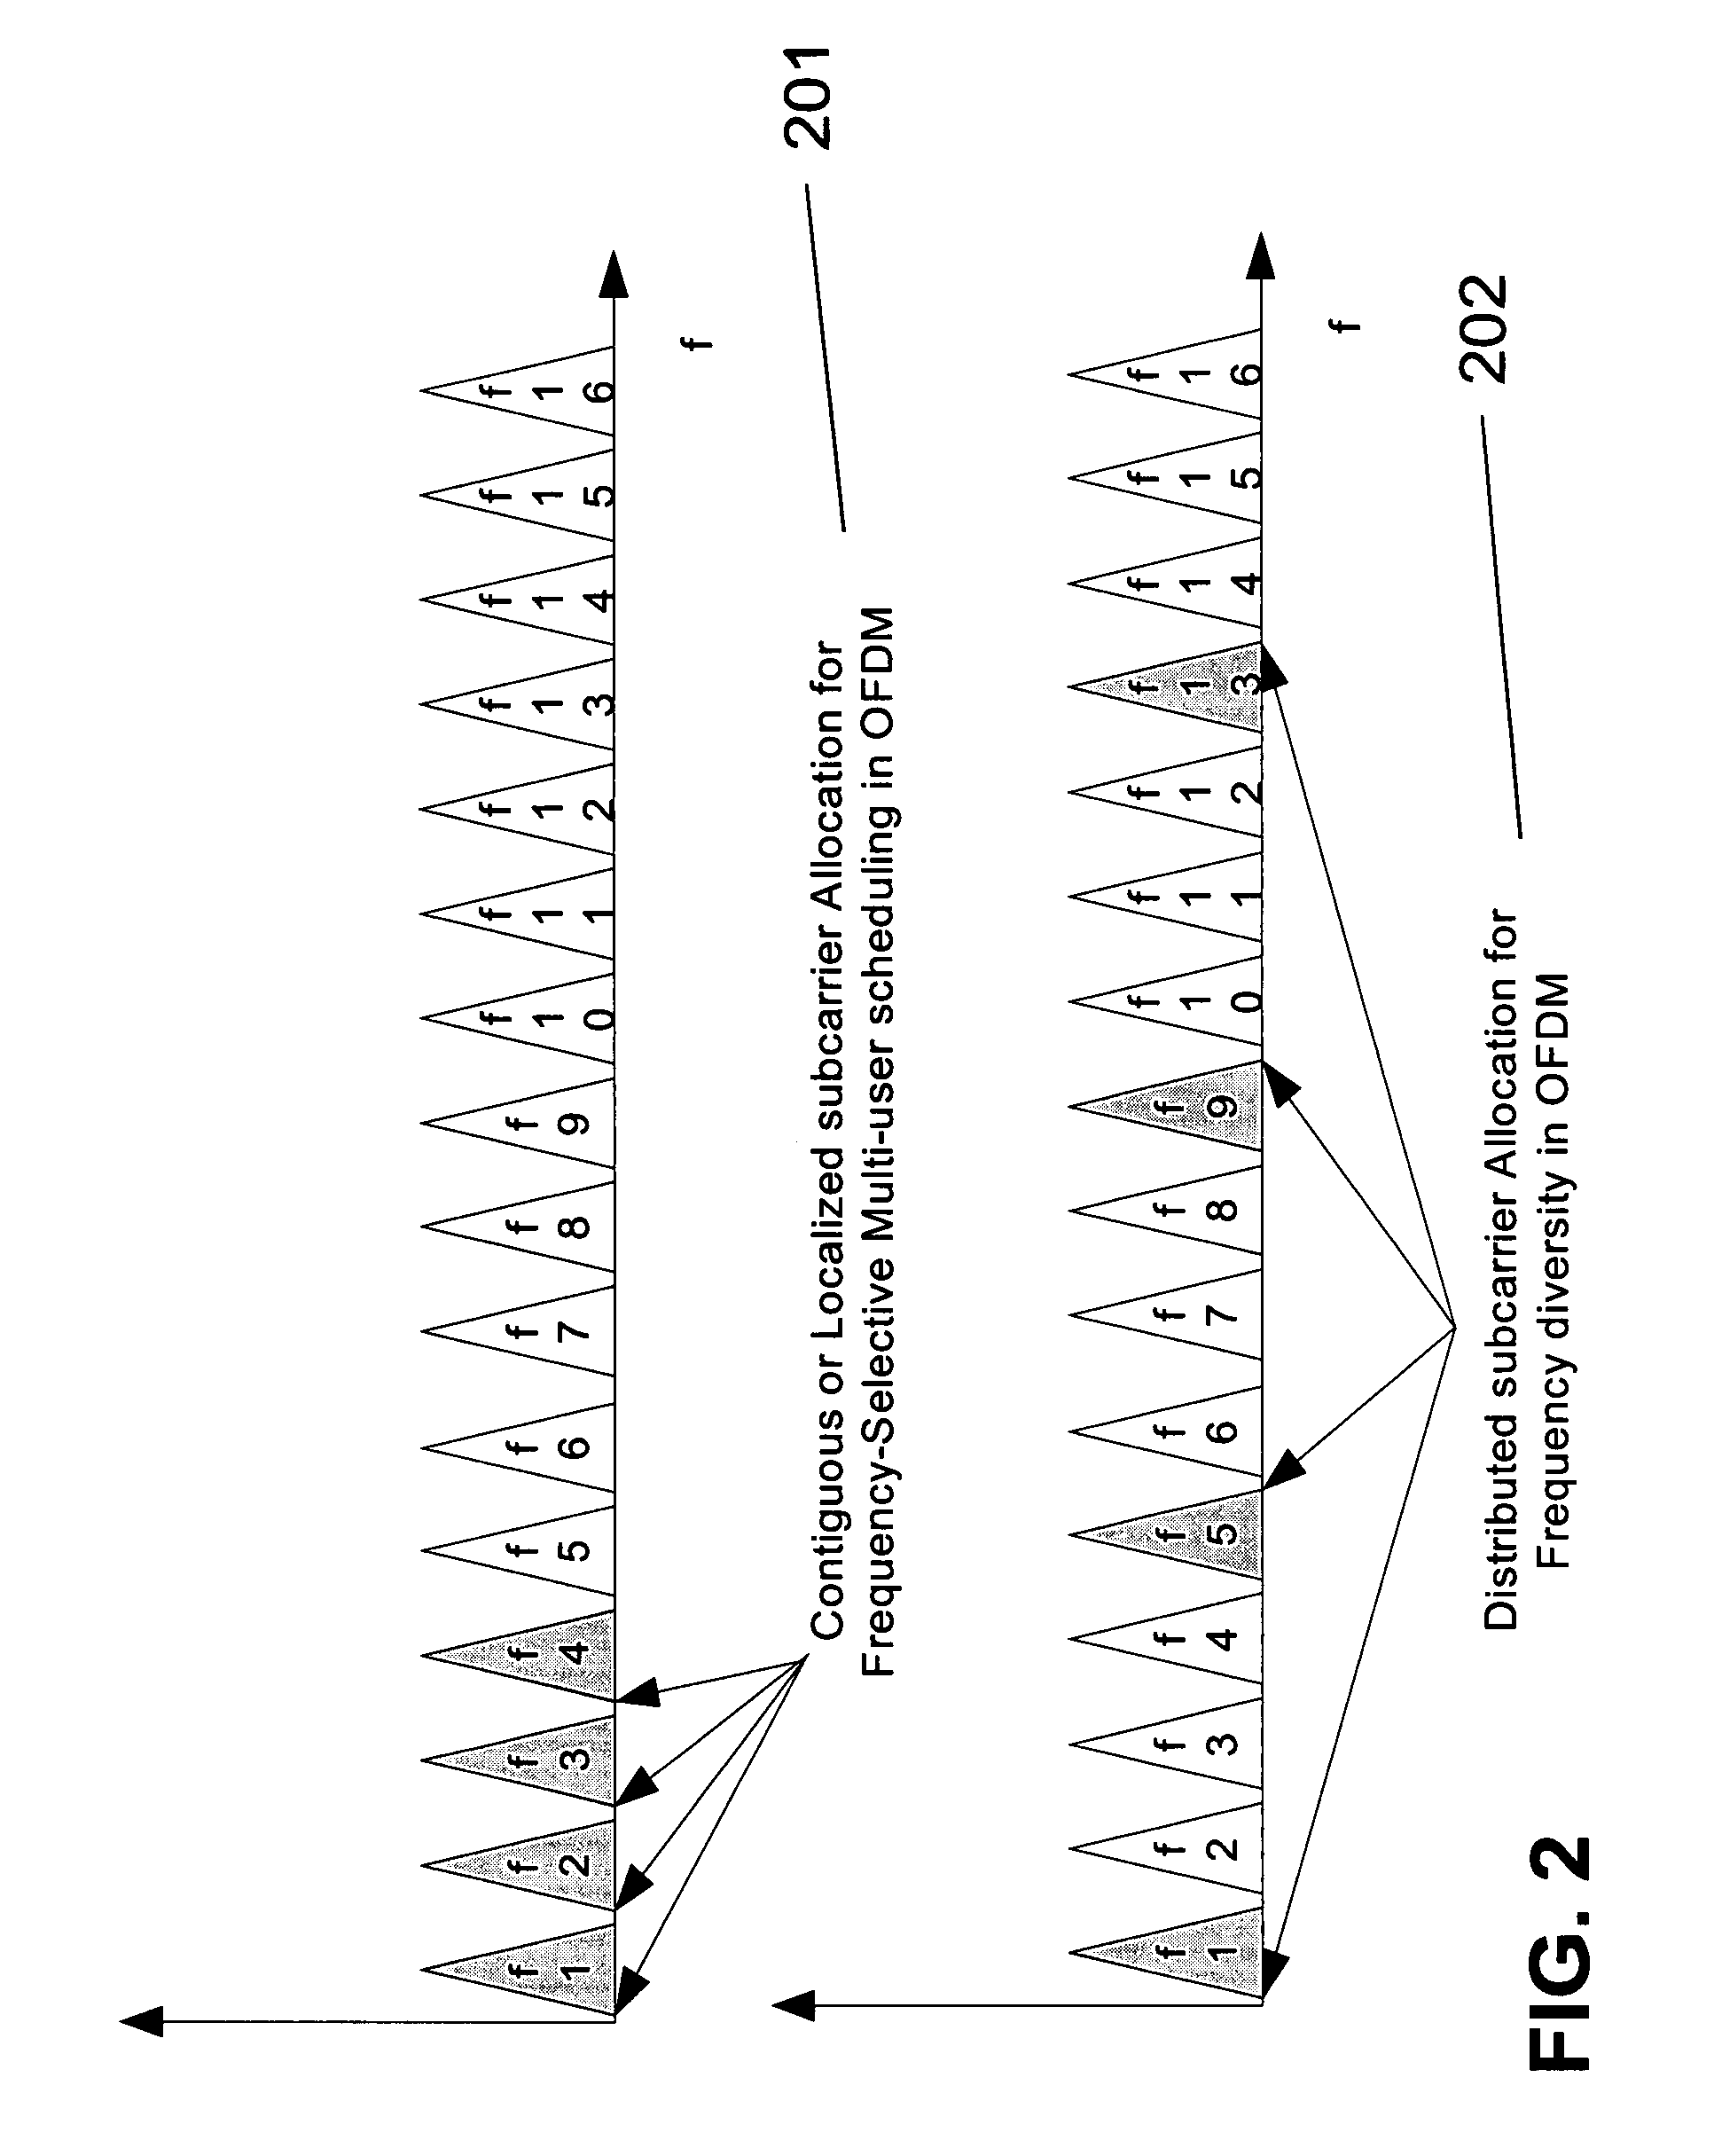 Multi-user MIMO feedback and transmission in a wireless communication system